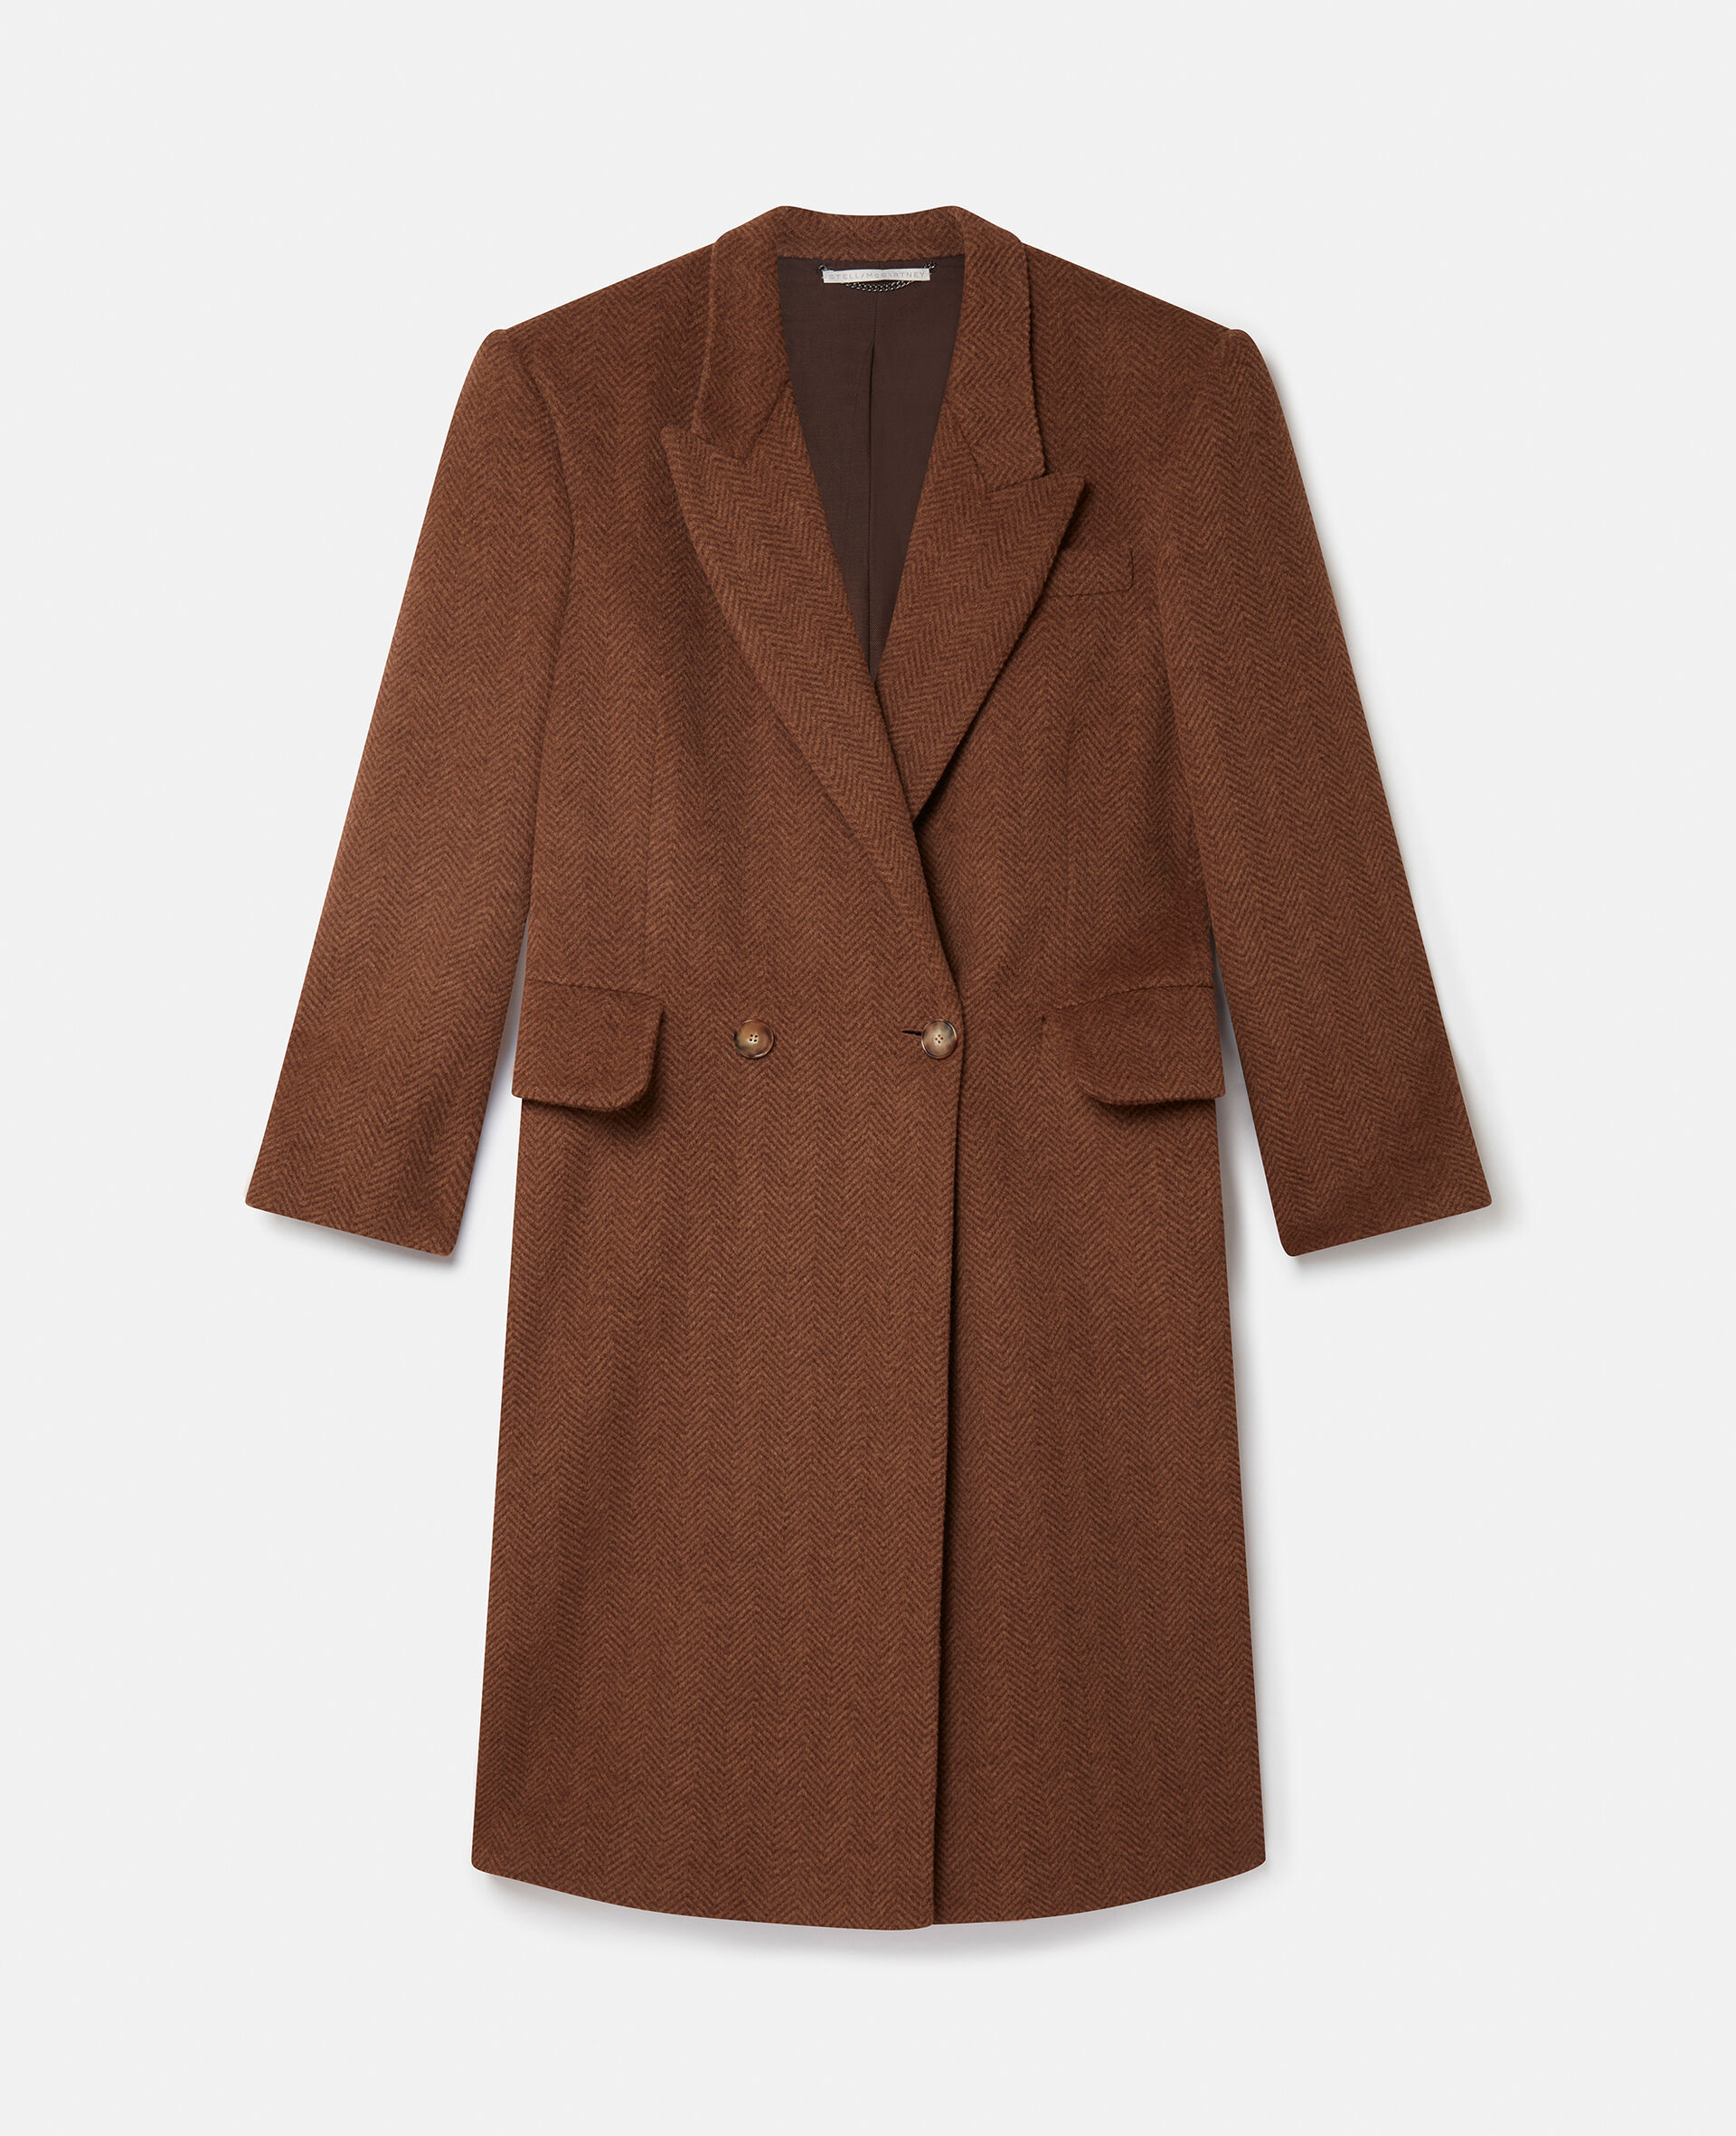 Long Wool Double-Breasted Overcoat-Brown-large